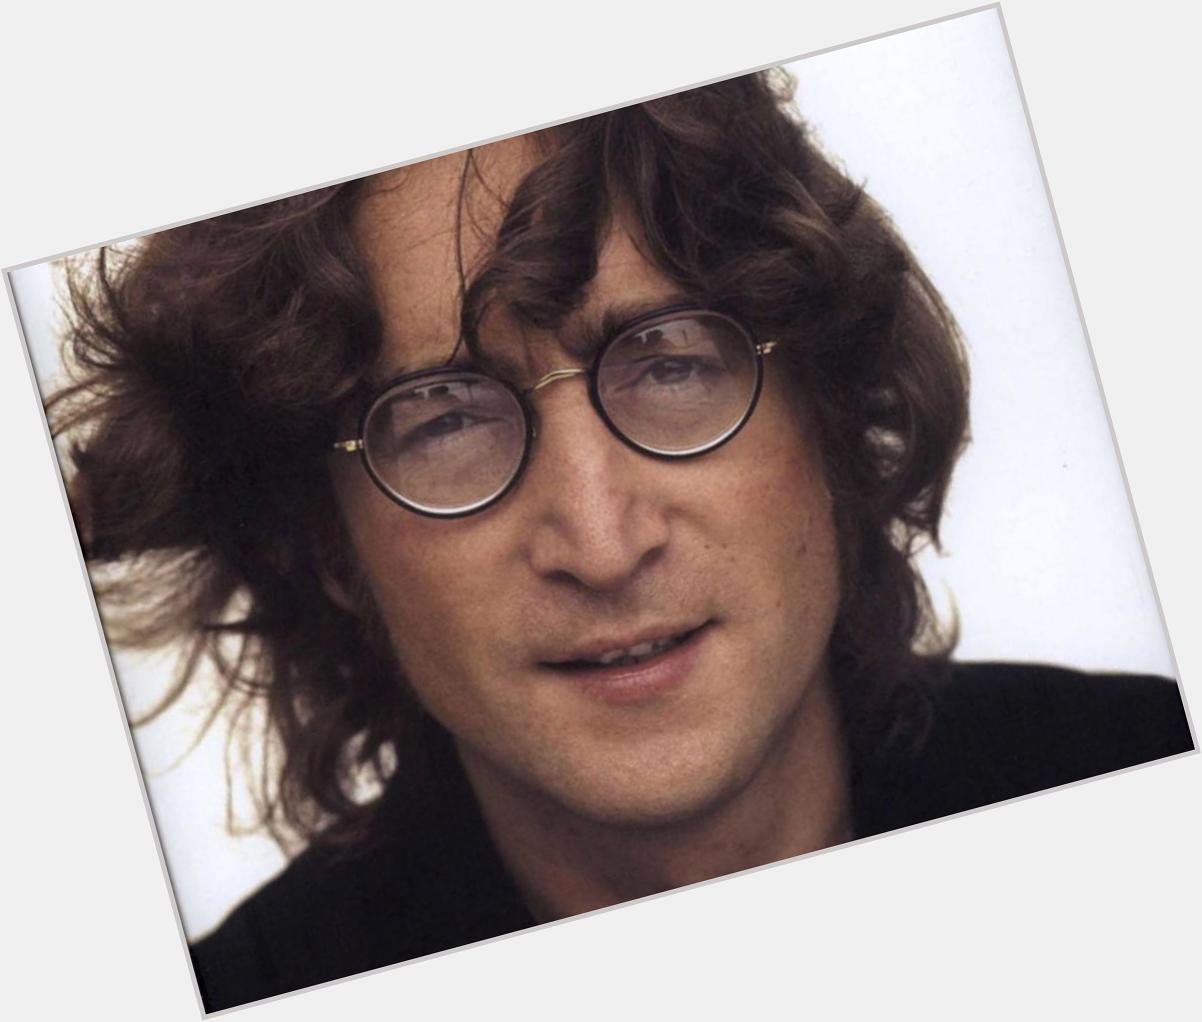 A happy posthumous birthday to the one and only John Lennon 